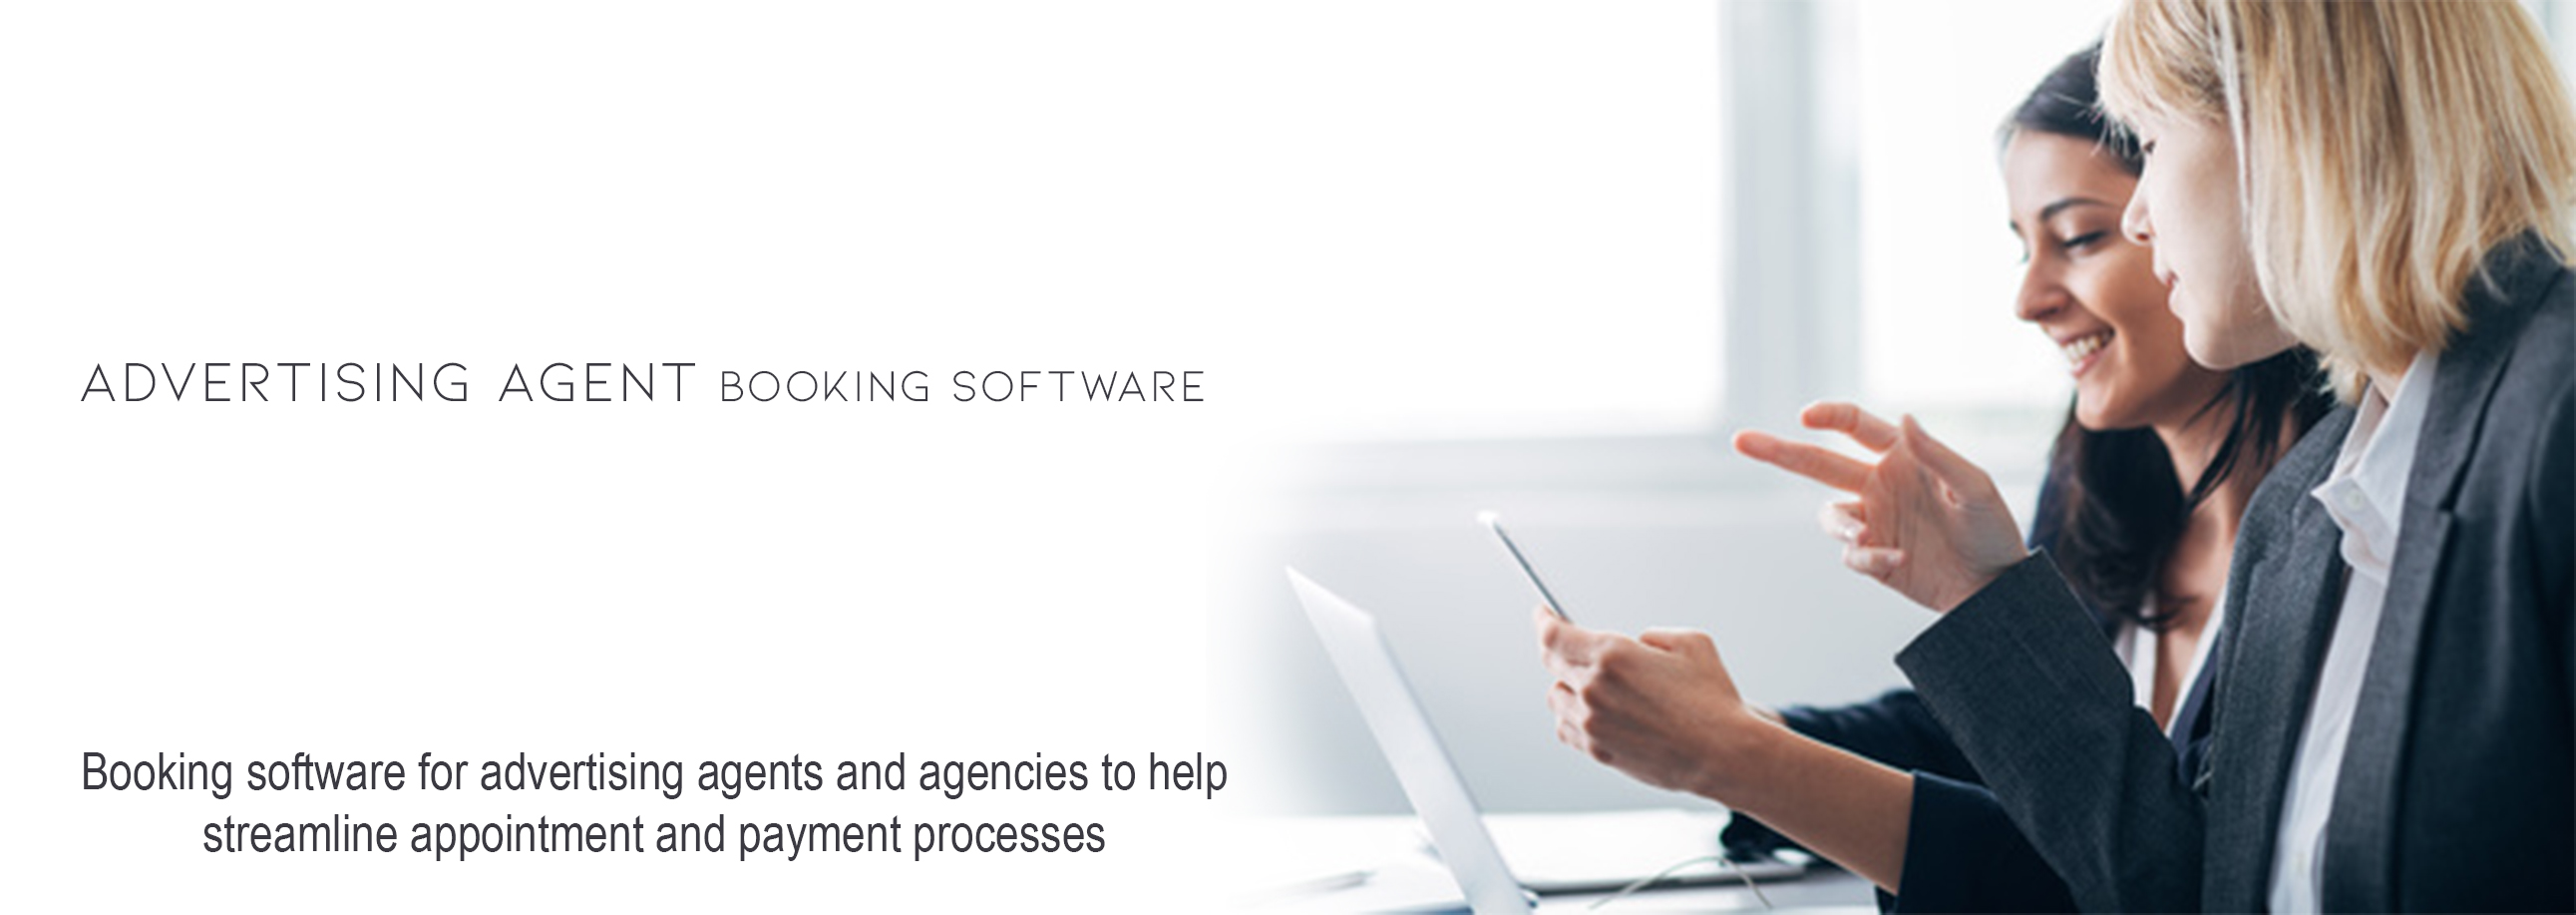 Advertising Agent Booking Software